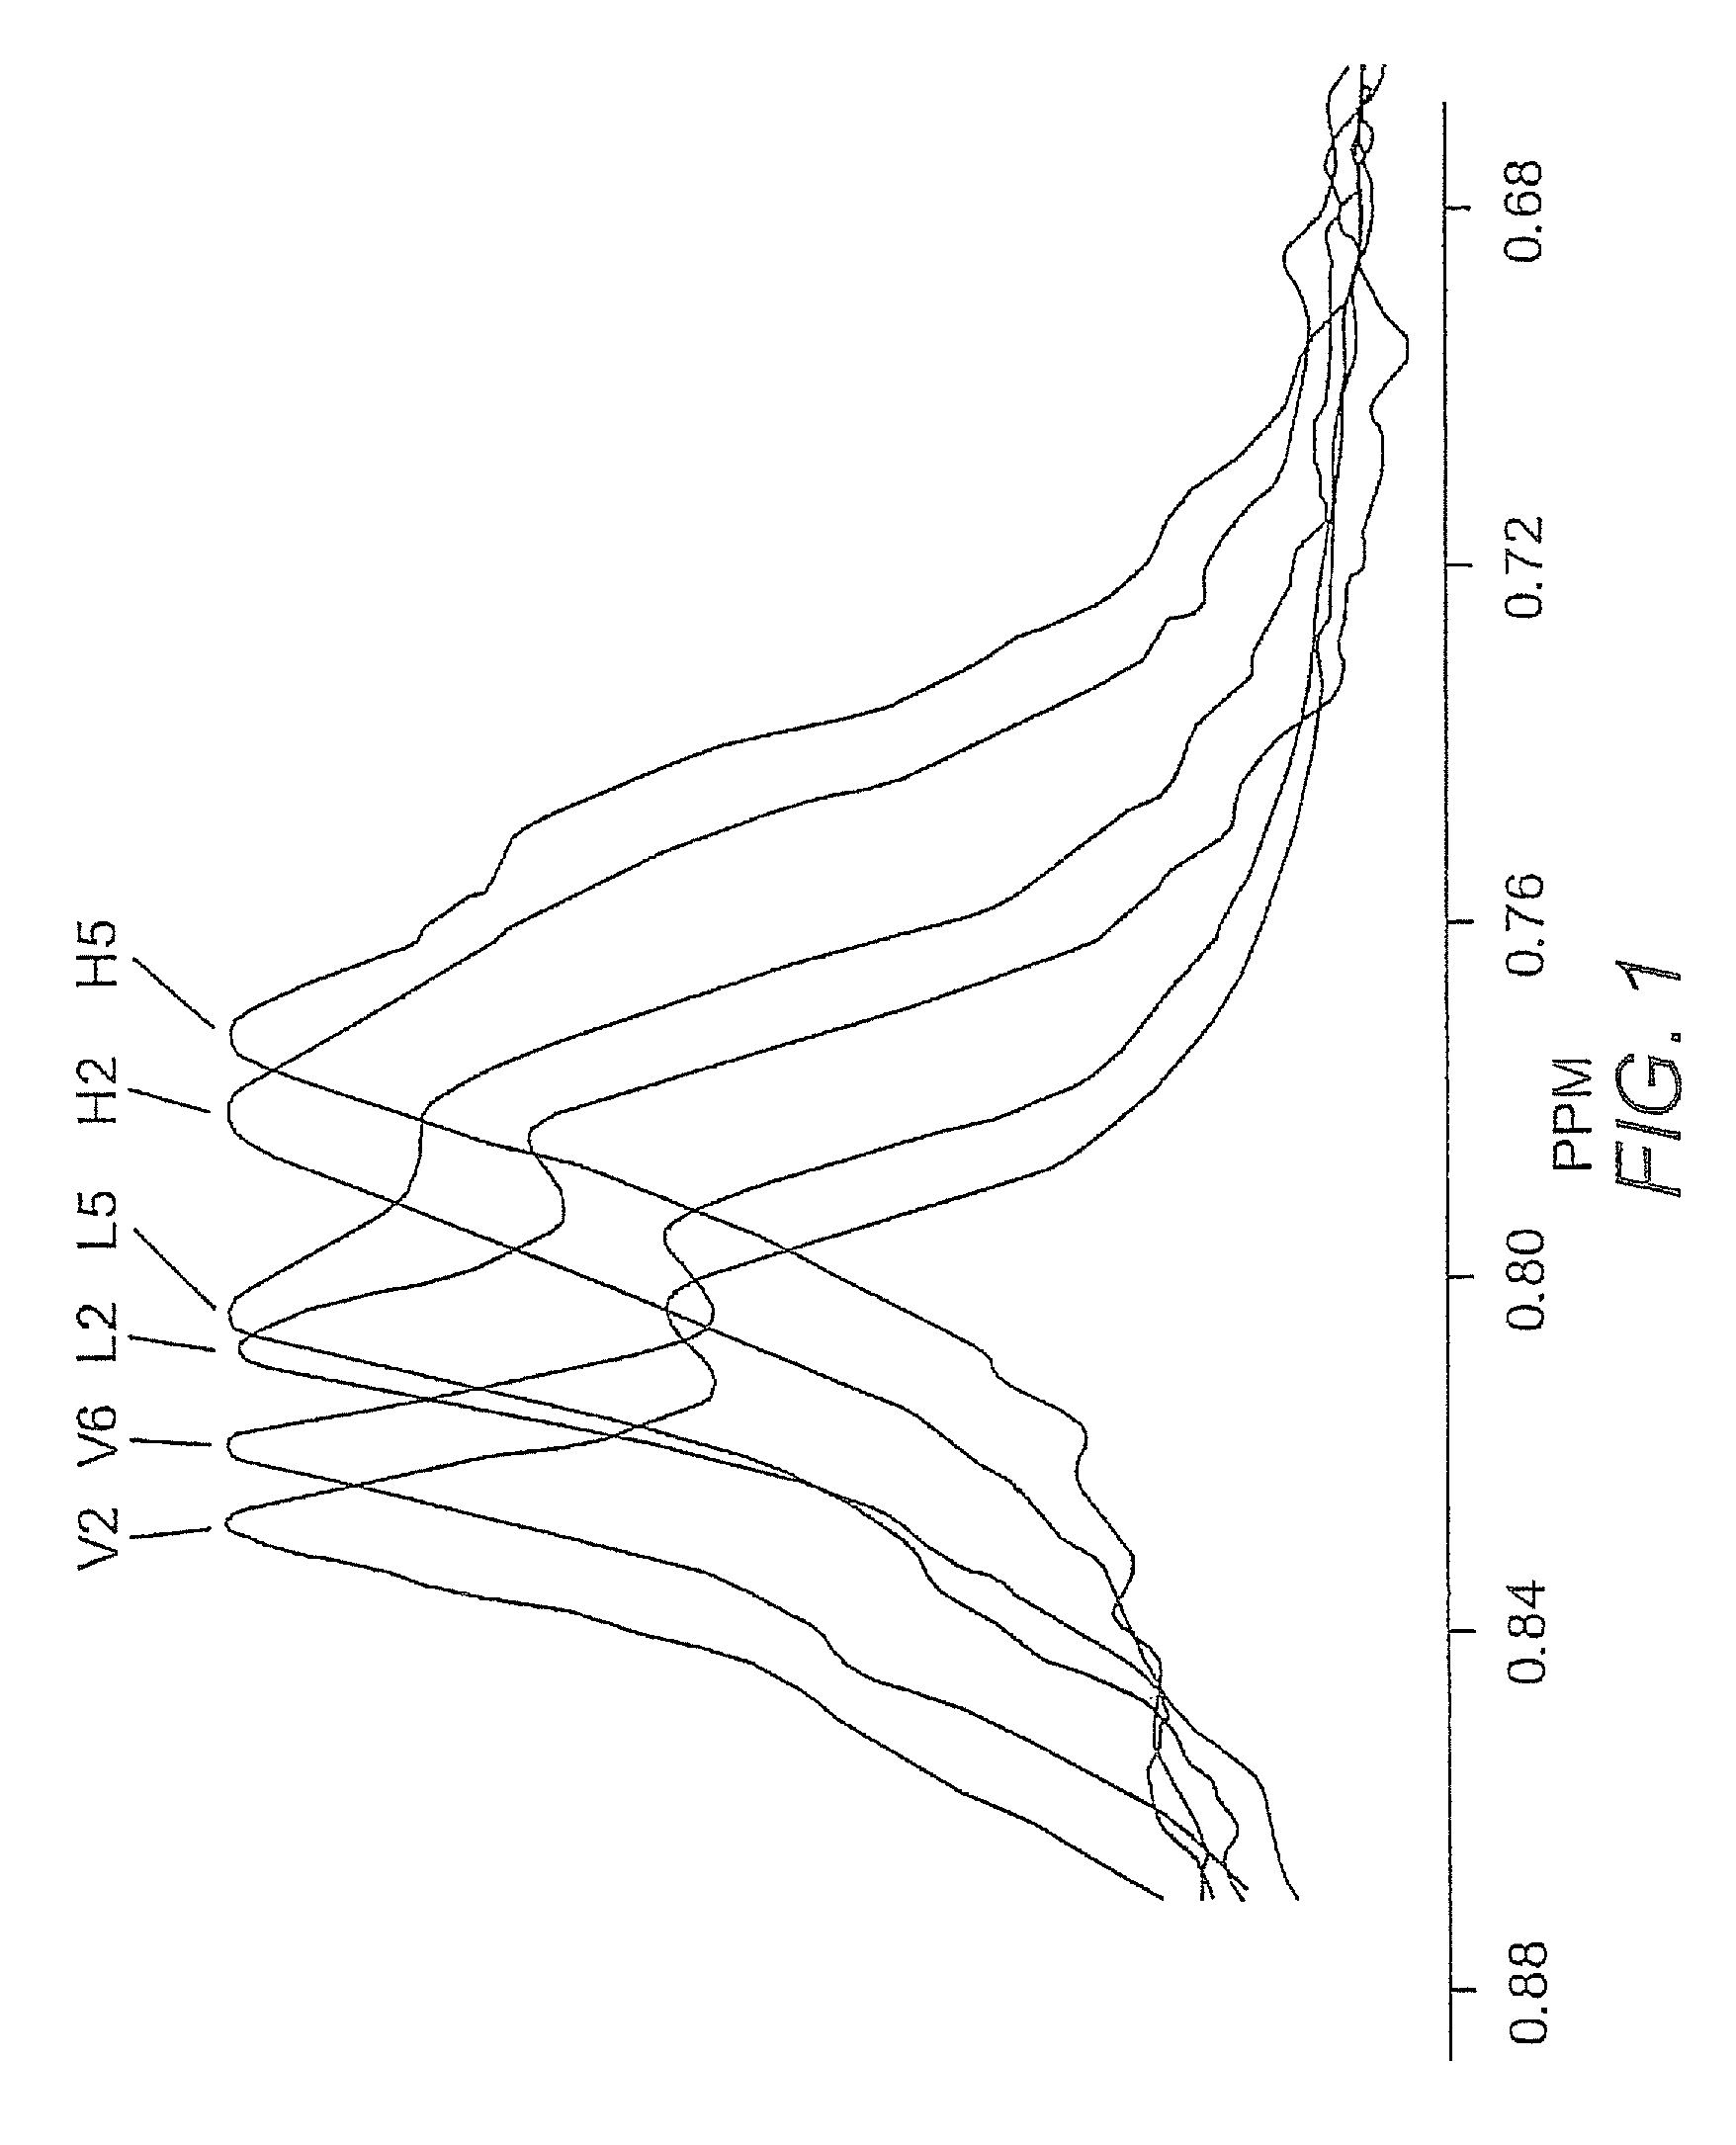 Methods, systems and computer programs for assessing CHD risk using adjusted HDL particle number measurements